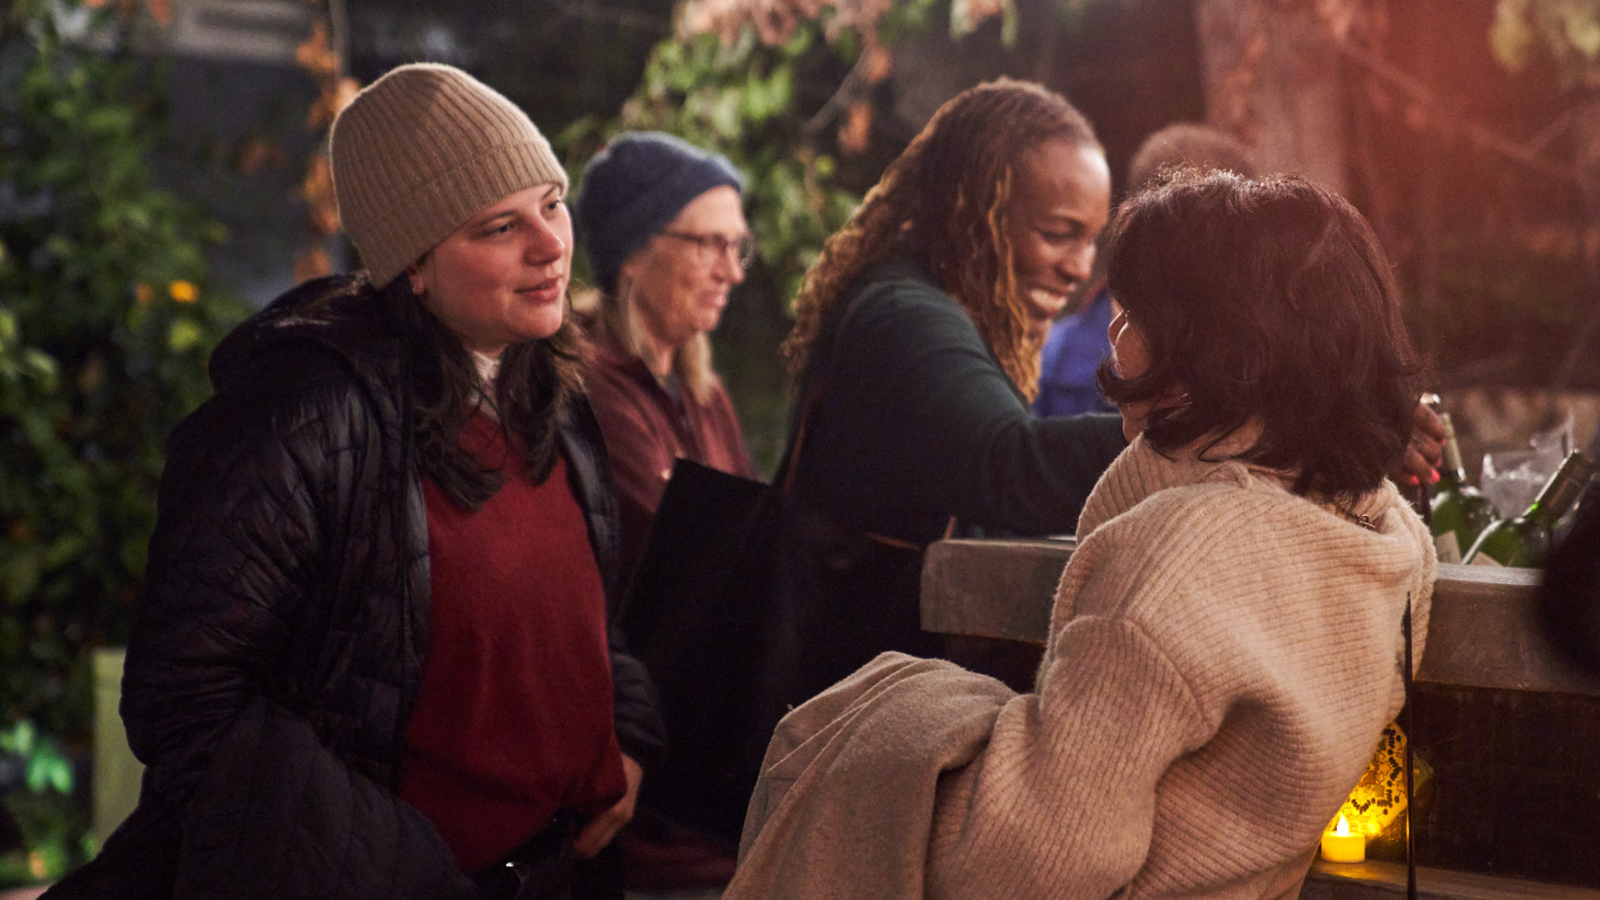 An age diverse group of women chat while getting drinks at an outdoor bar. 